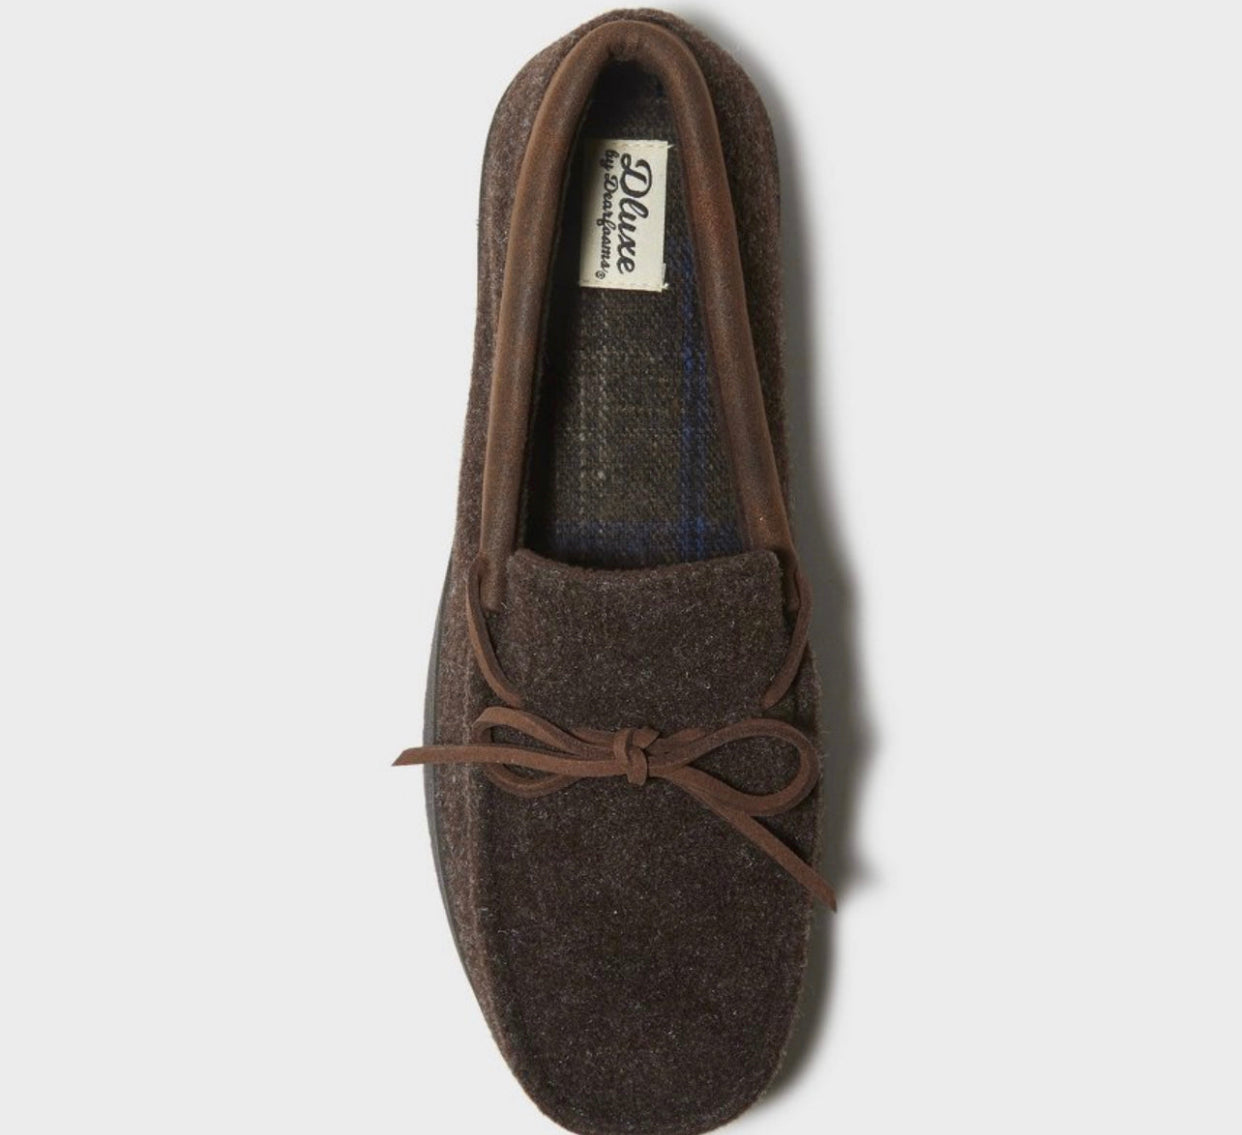 Casepack of 6 pairs of size Large (11-12) Jacoby Moccasin slippers